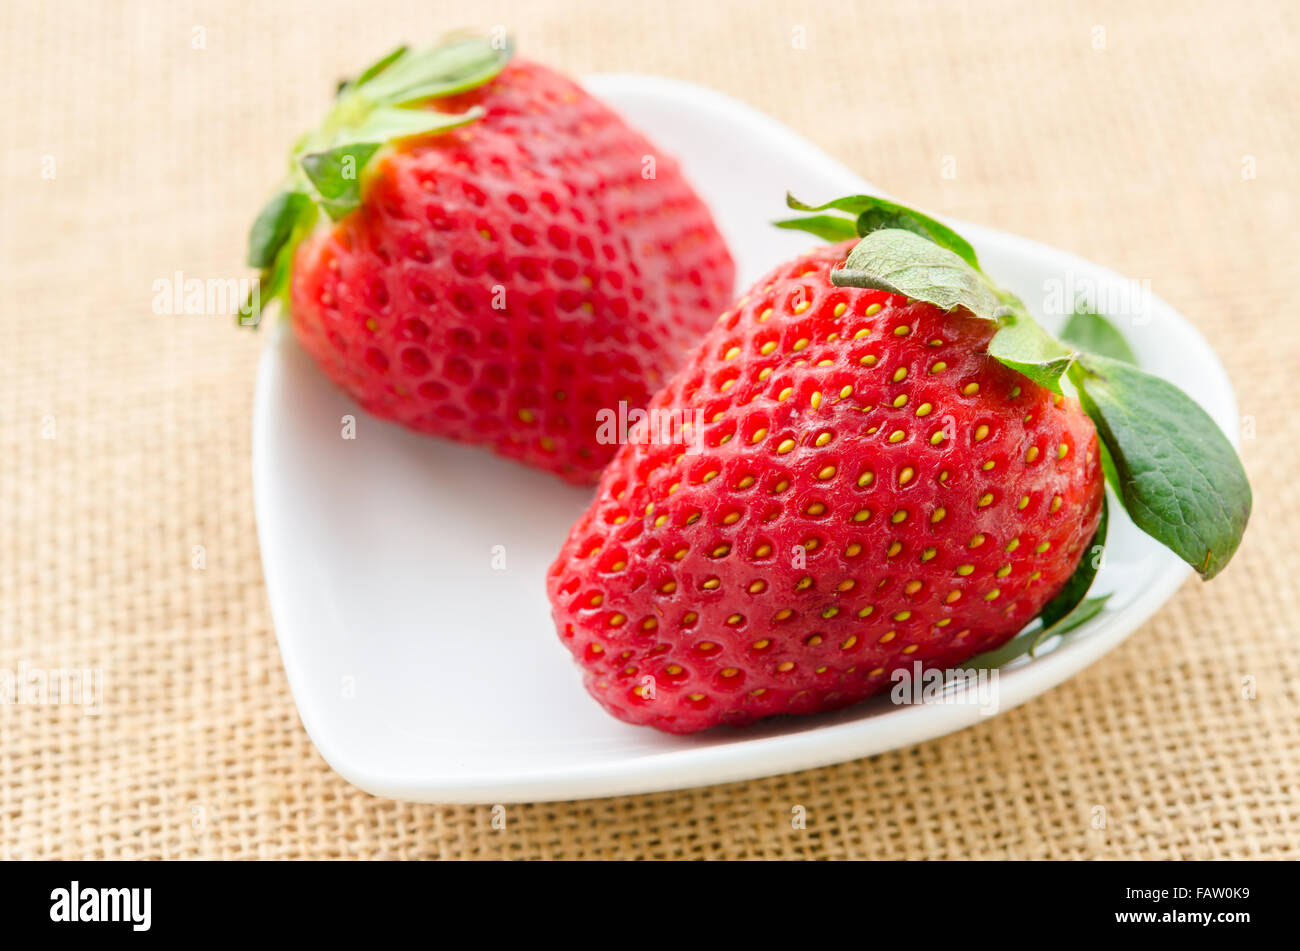 Ripe red strawberries in white cup heart shape on sack background. Stock Photo